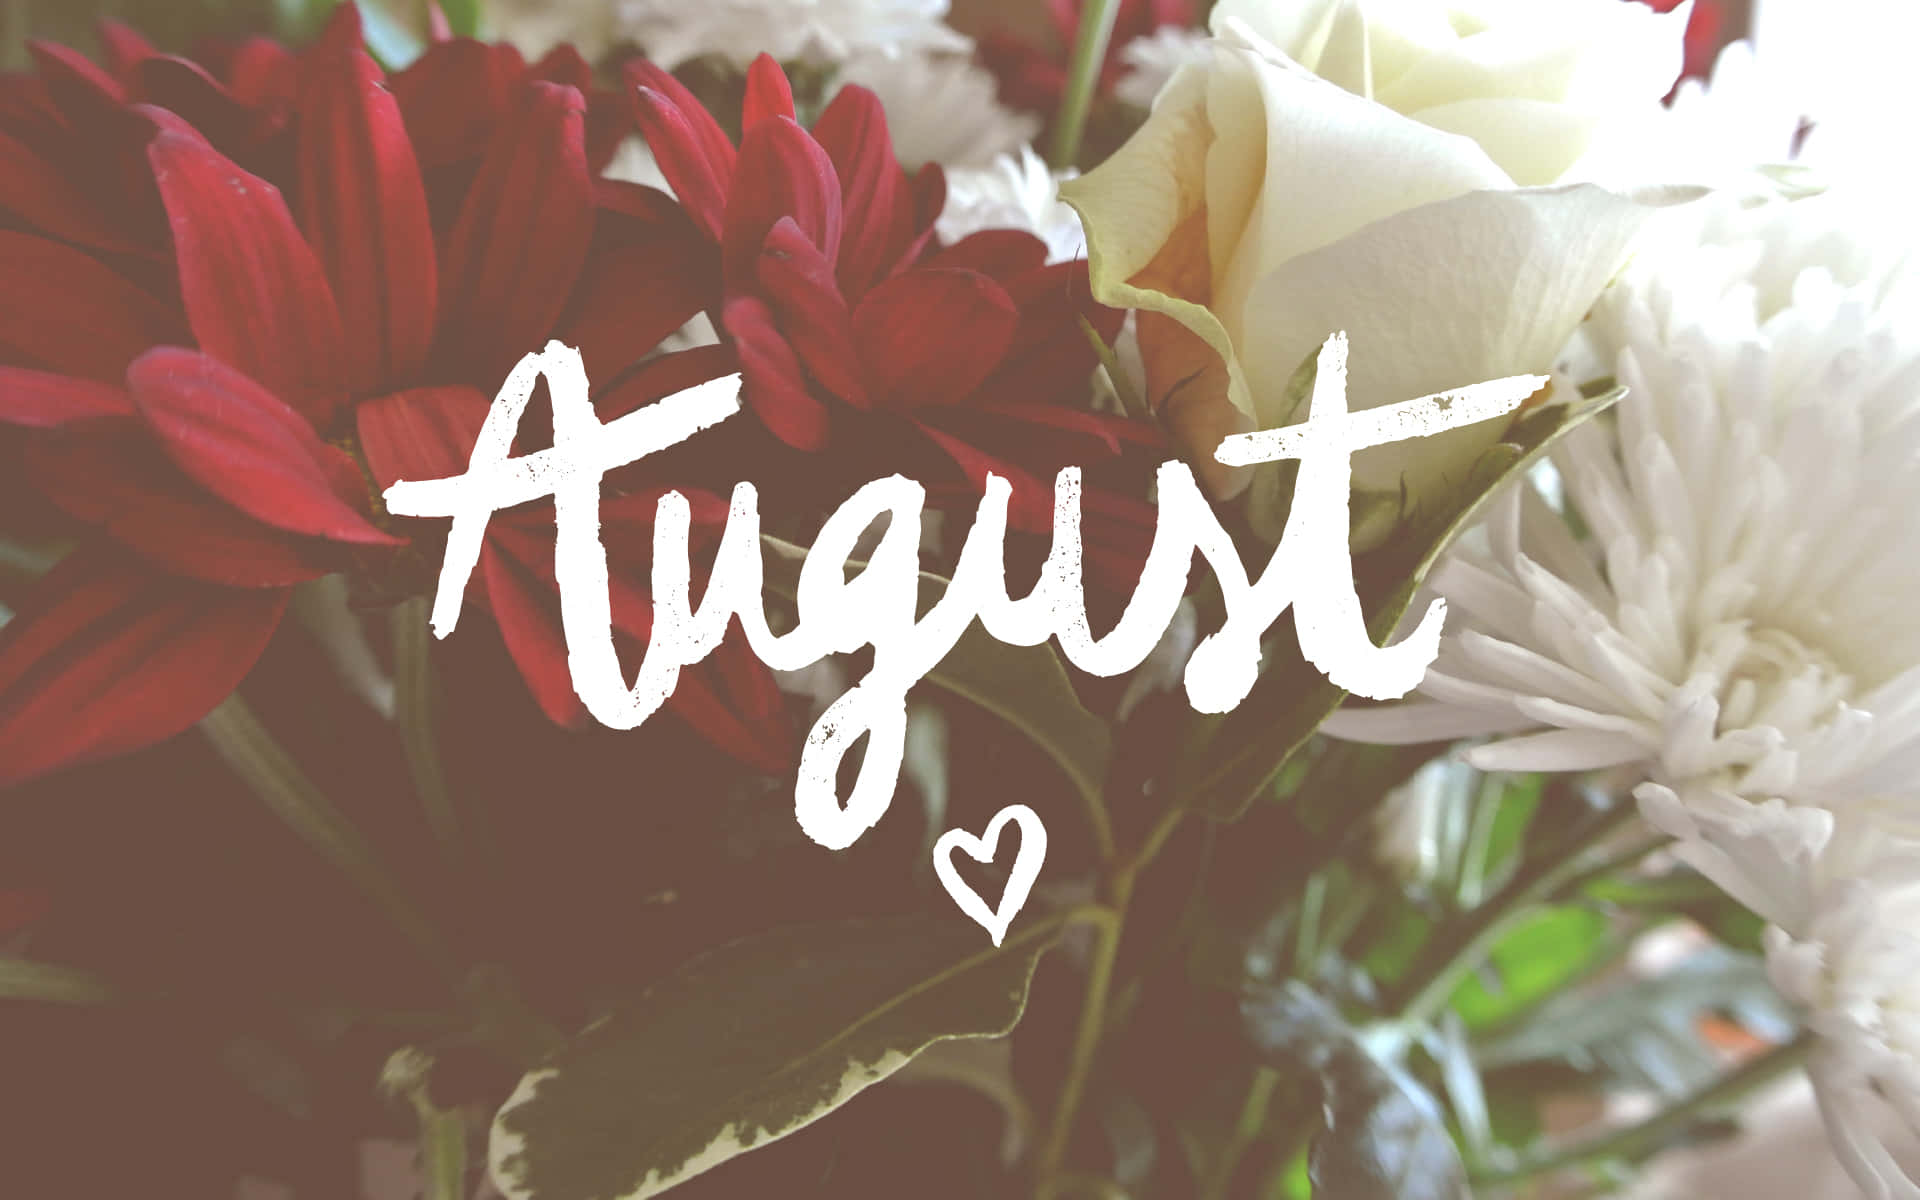 Make the most of August!